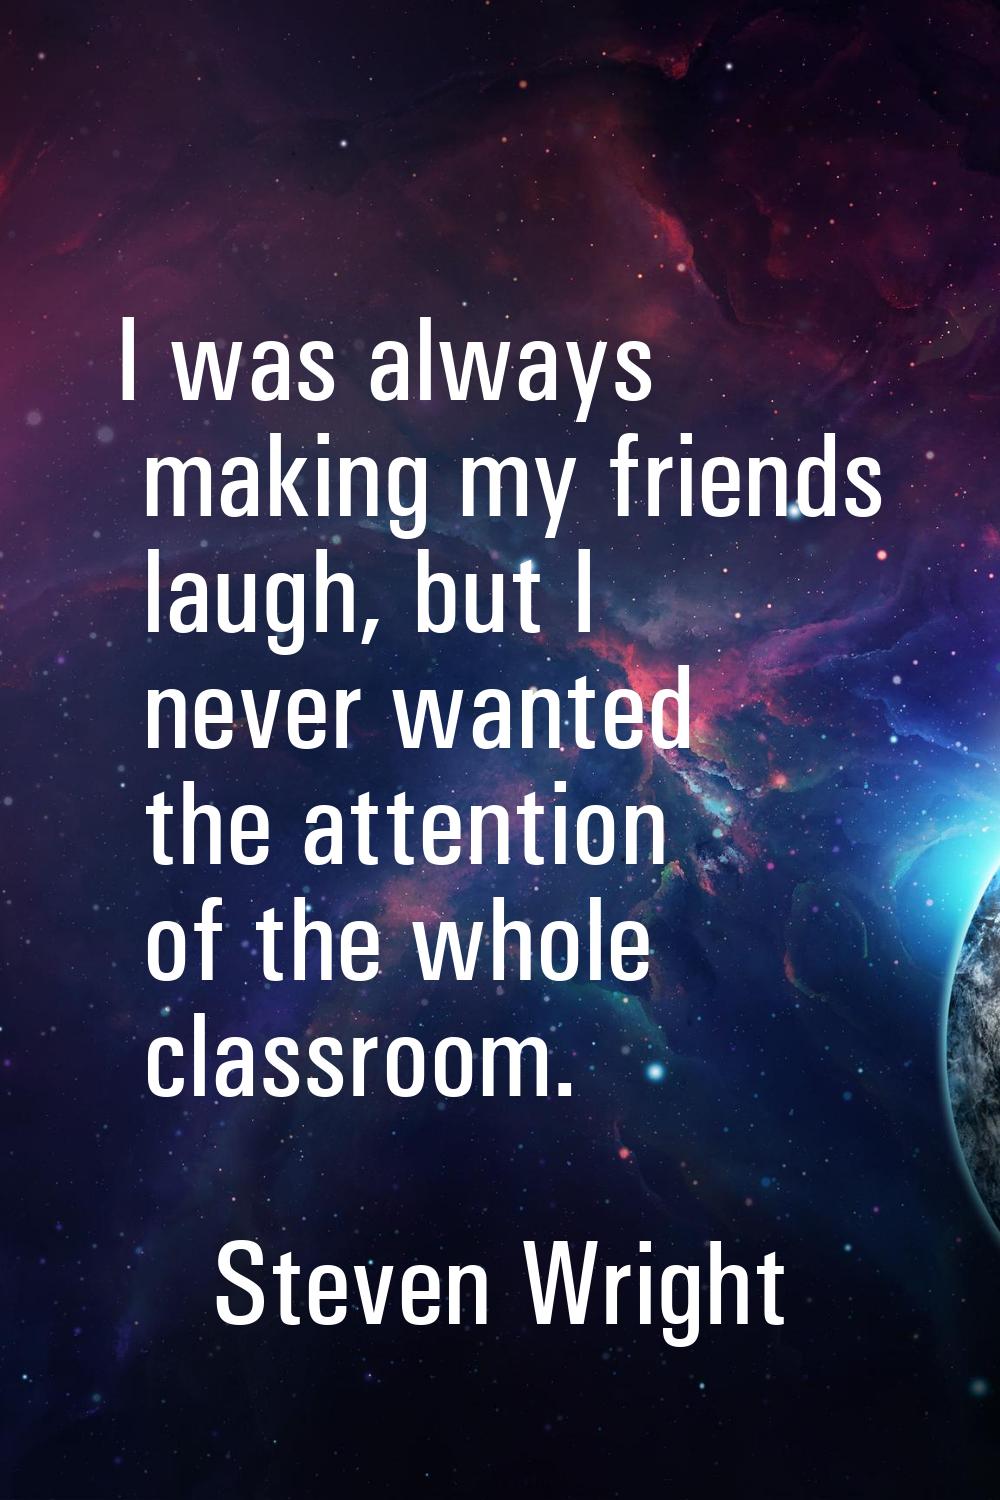 I was always making my friends laugh, but I never wanted the attention of the whole classroom.